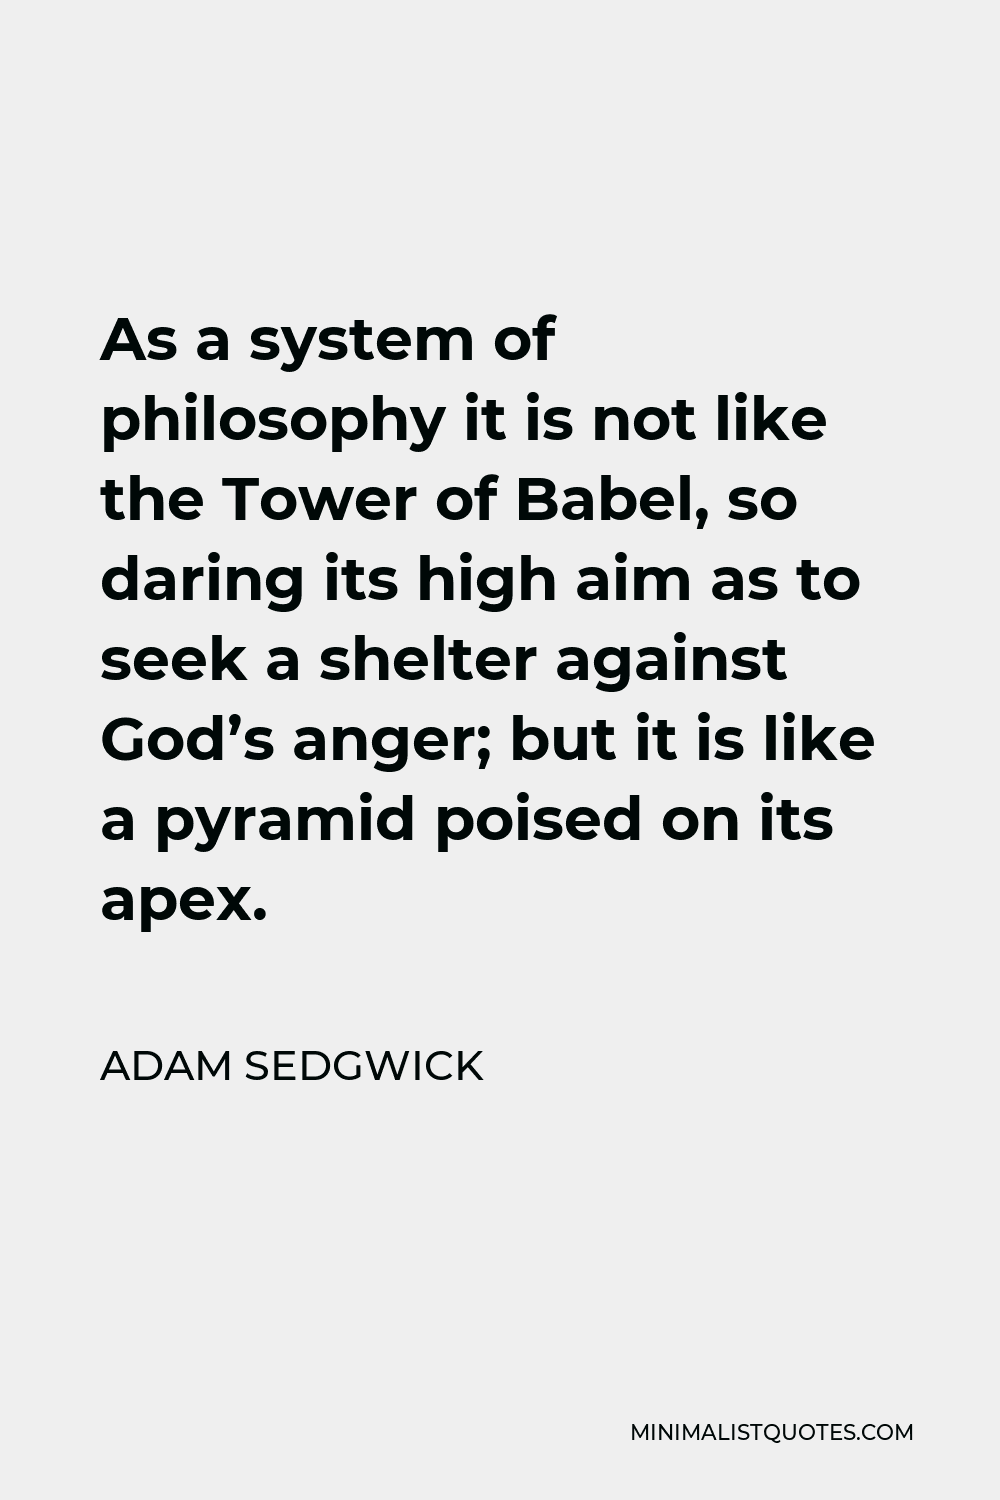 Adam Sedgwick Quote - As a system of philosophy it is not like the Tower of Babel, so daring its high aim as to seek a shelter against God’s anger; but it is like a pyramid poised on its apex.